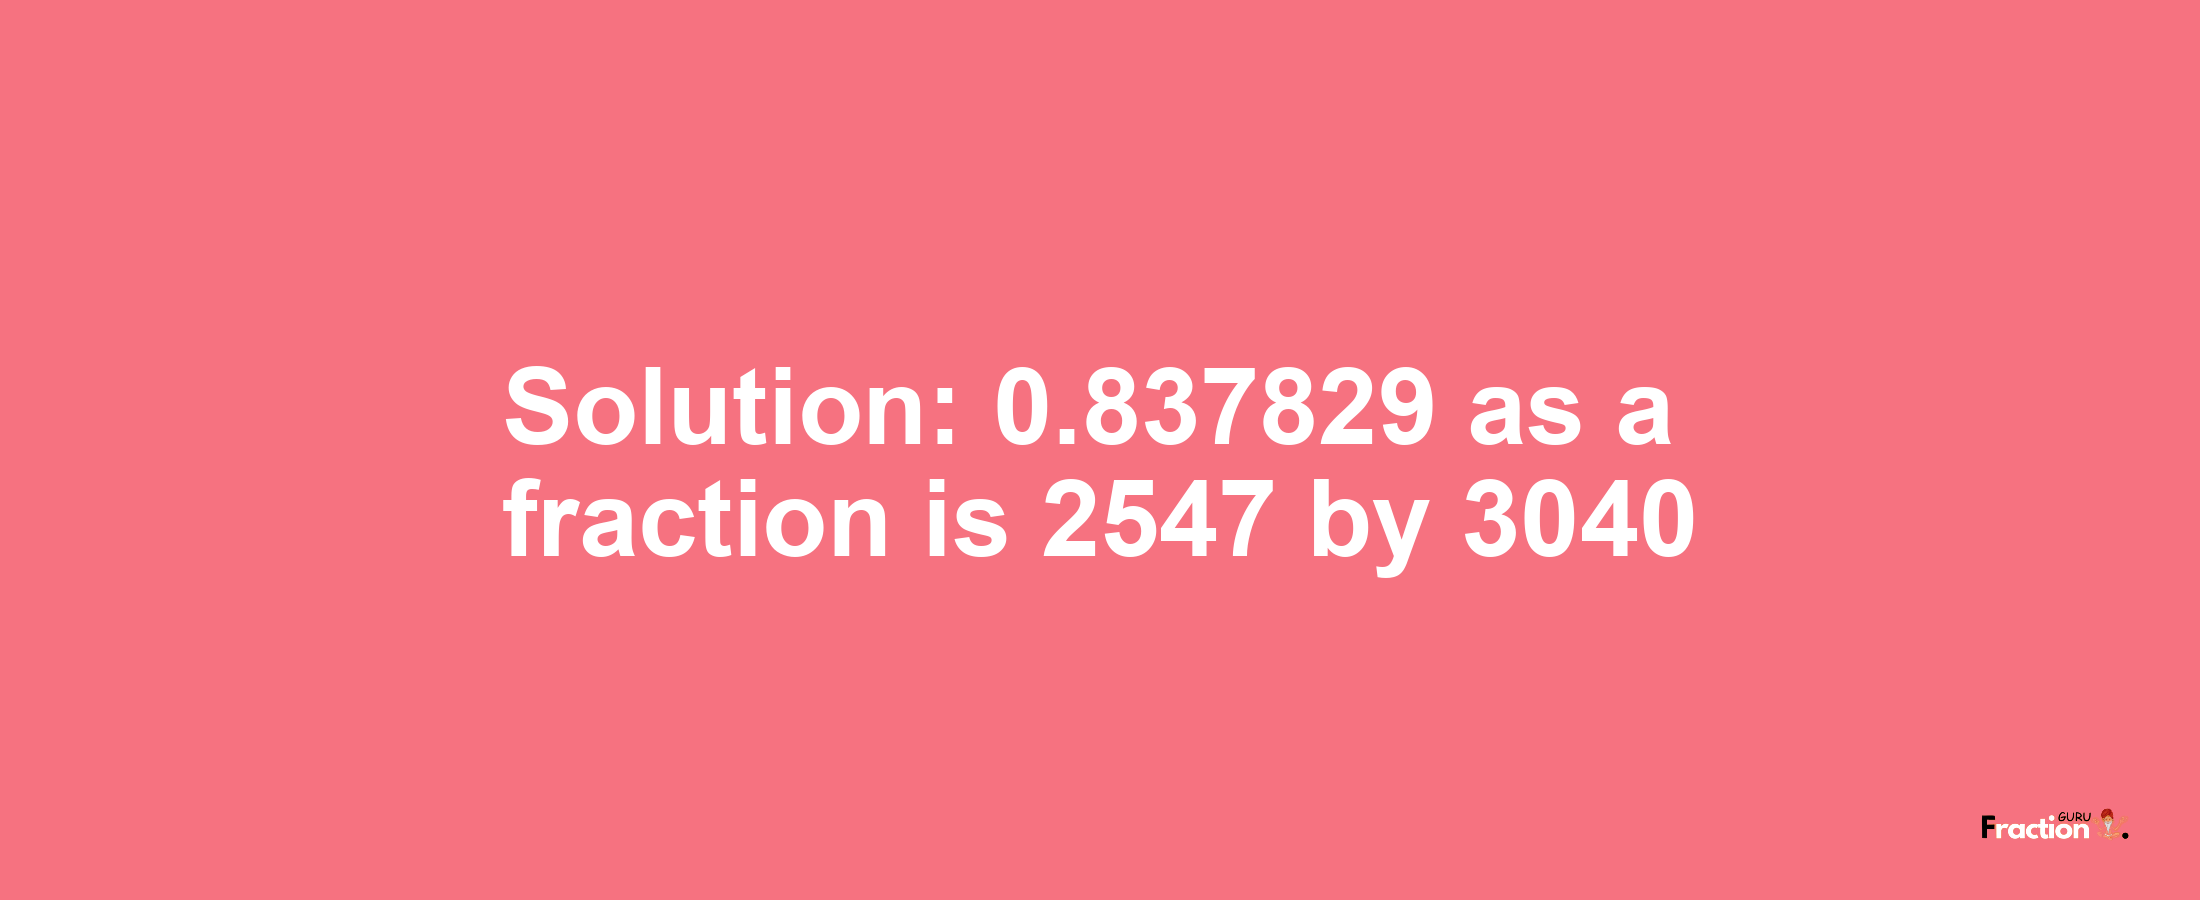 Solution:0.837829 as a fraction is 2547/3040